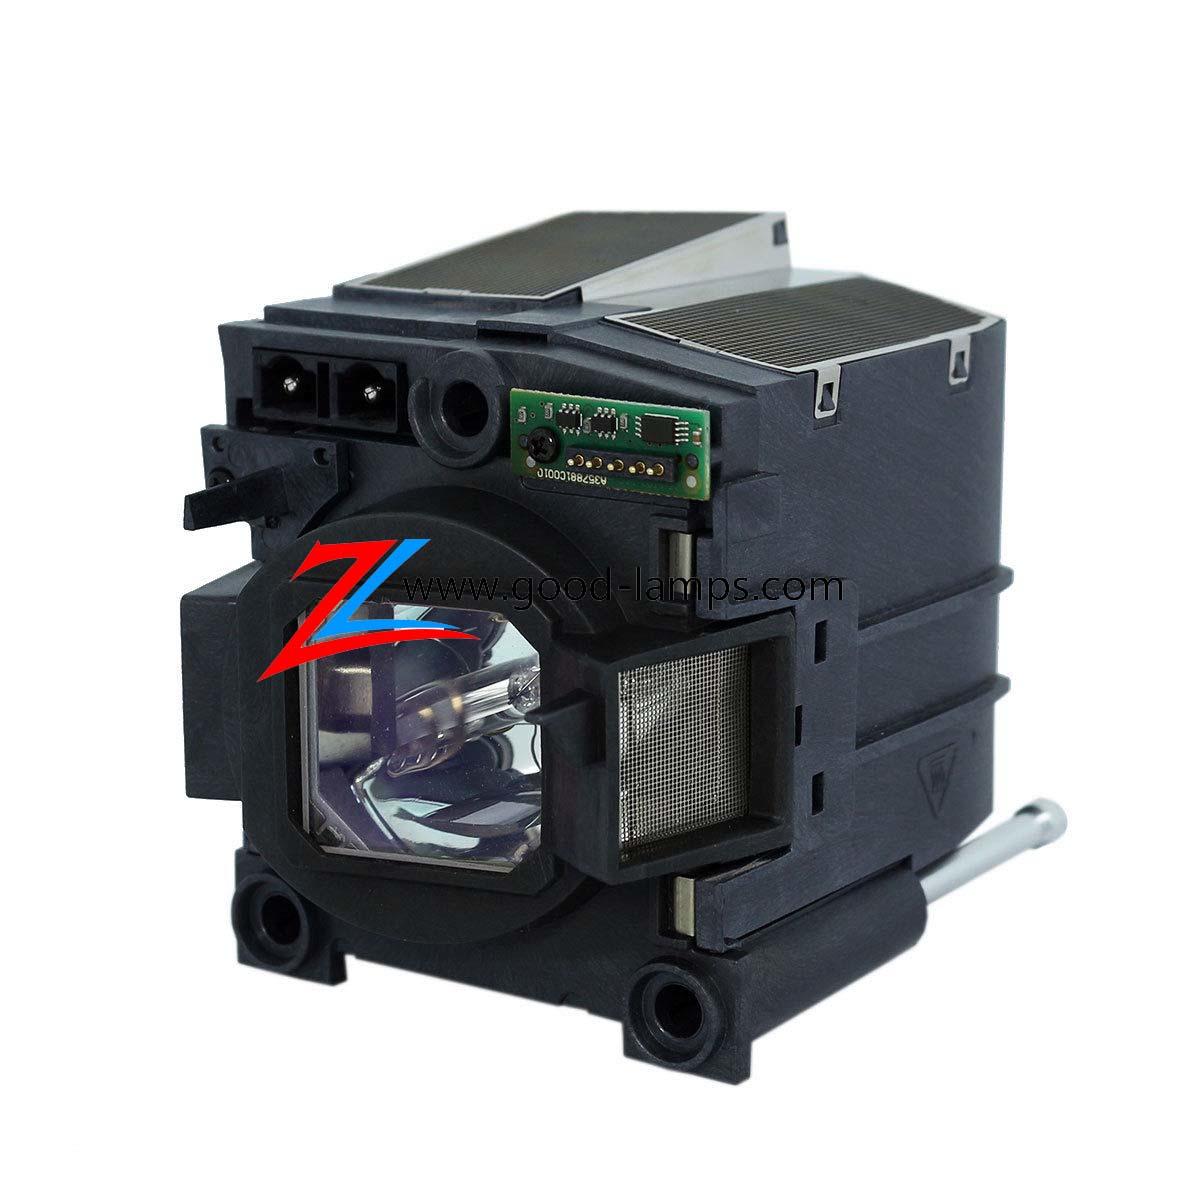 Details about PROJECTIONDESIGNF82Originalinsidelamp-Replaces400-0700-00;R9801275;400-0750-00